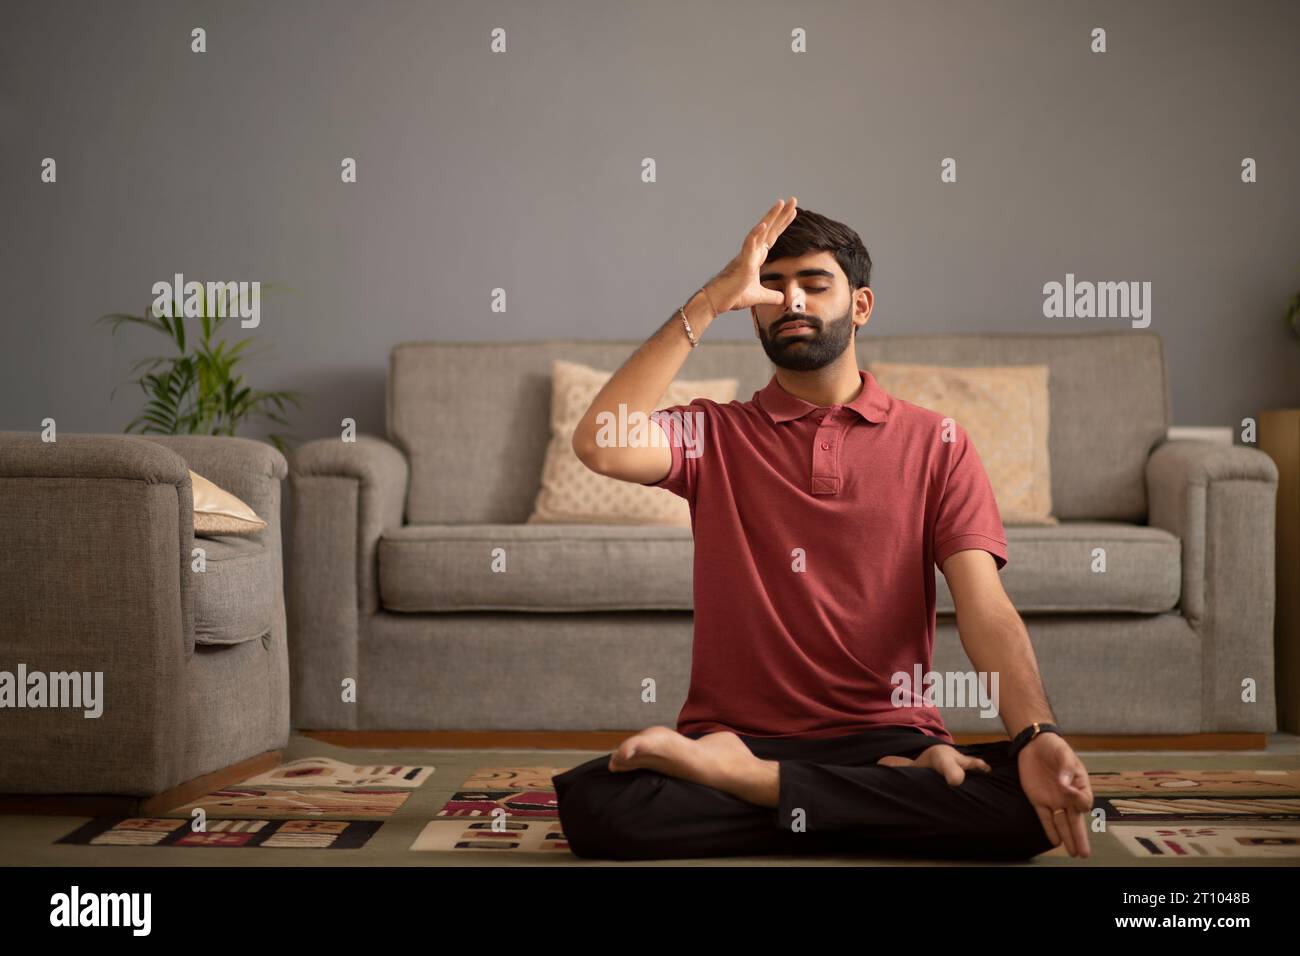 Young man meditating in living room Stock Photo